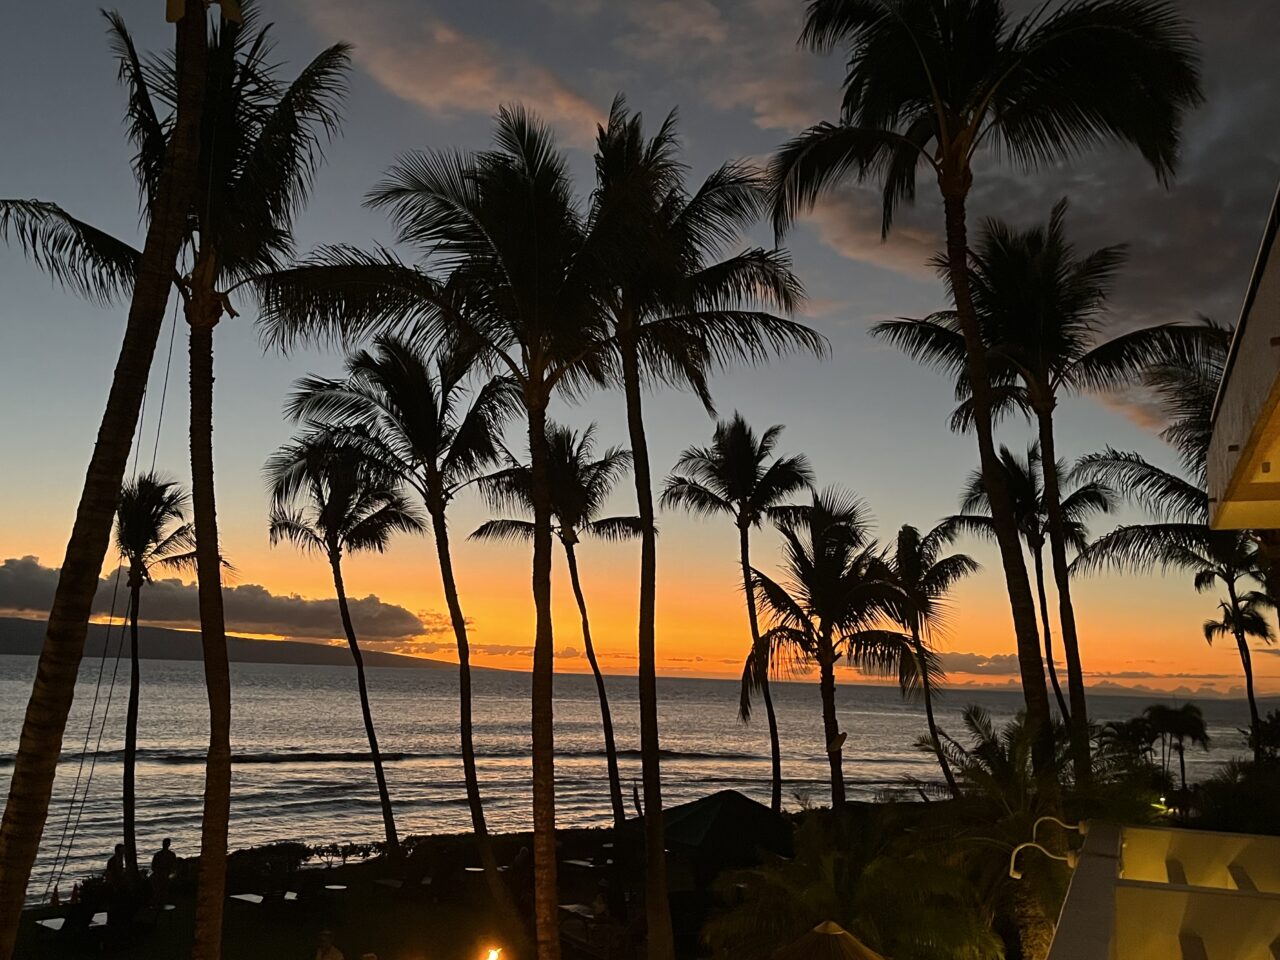 Photograph of a Hawaiian Sunset from the Personal Collection of Helene and Zaf